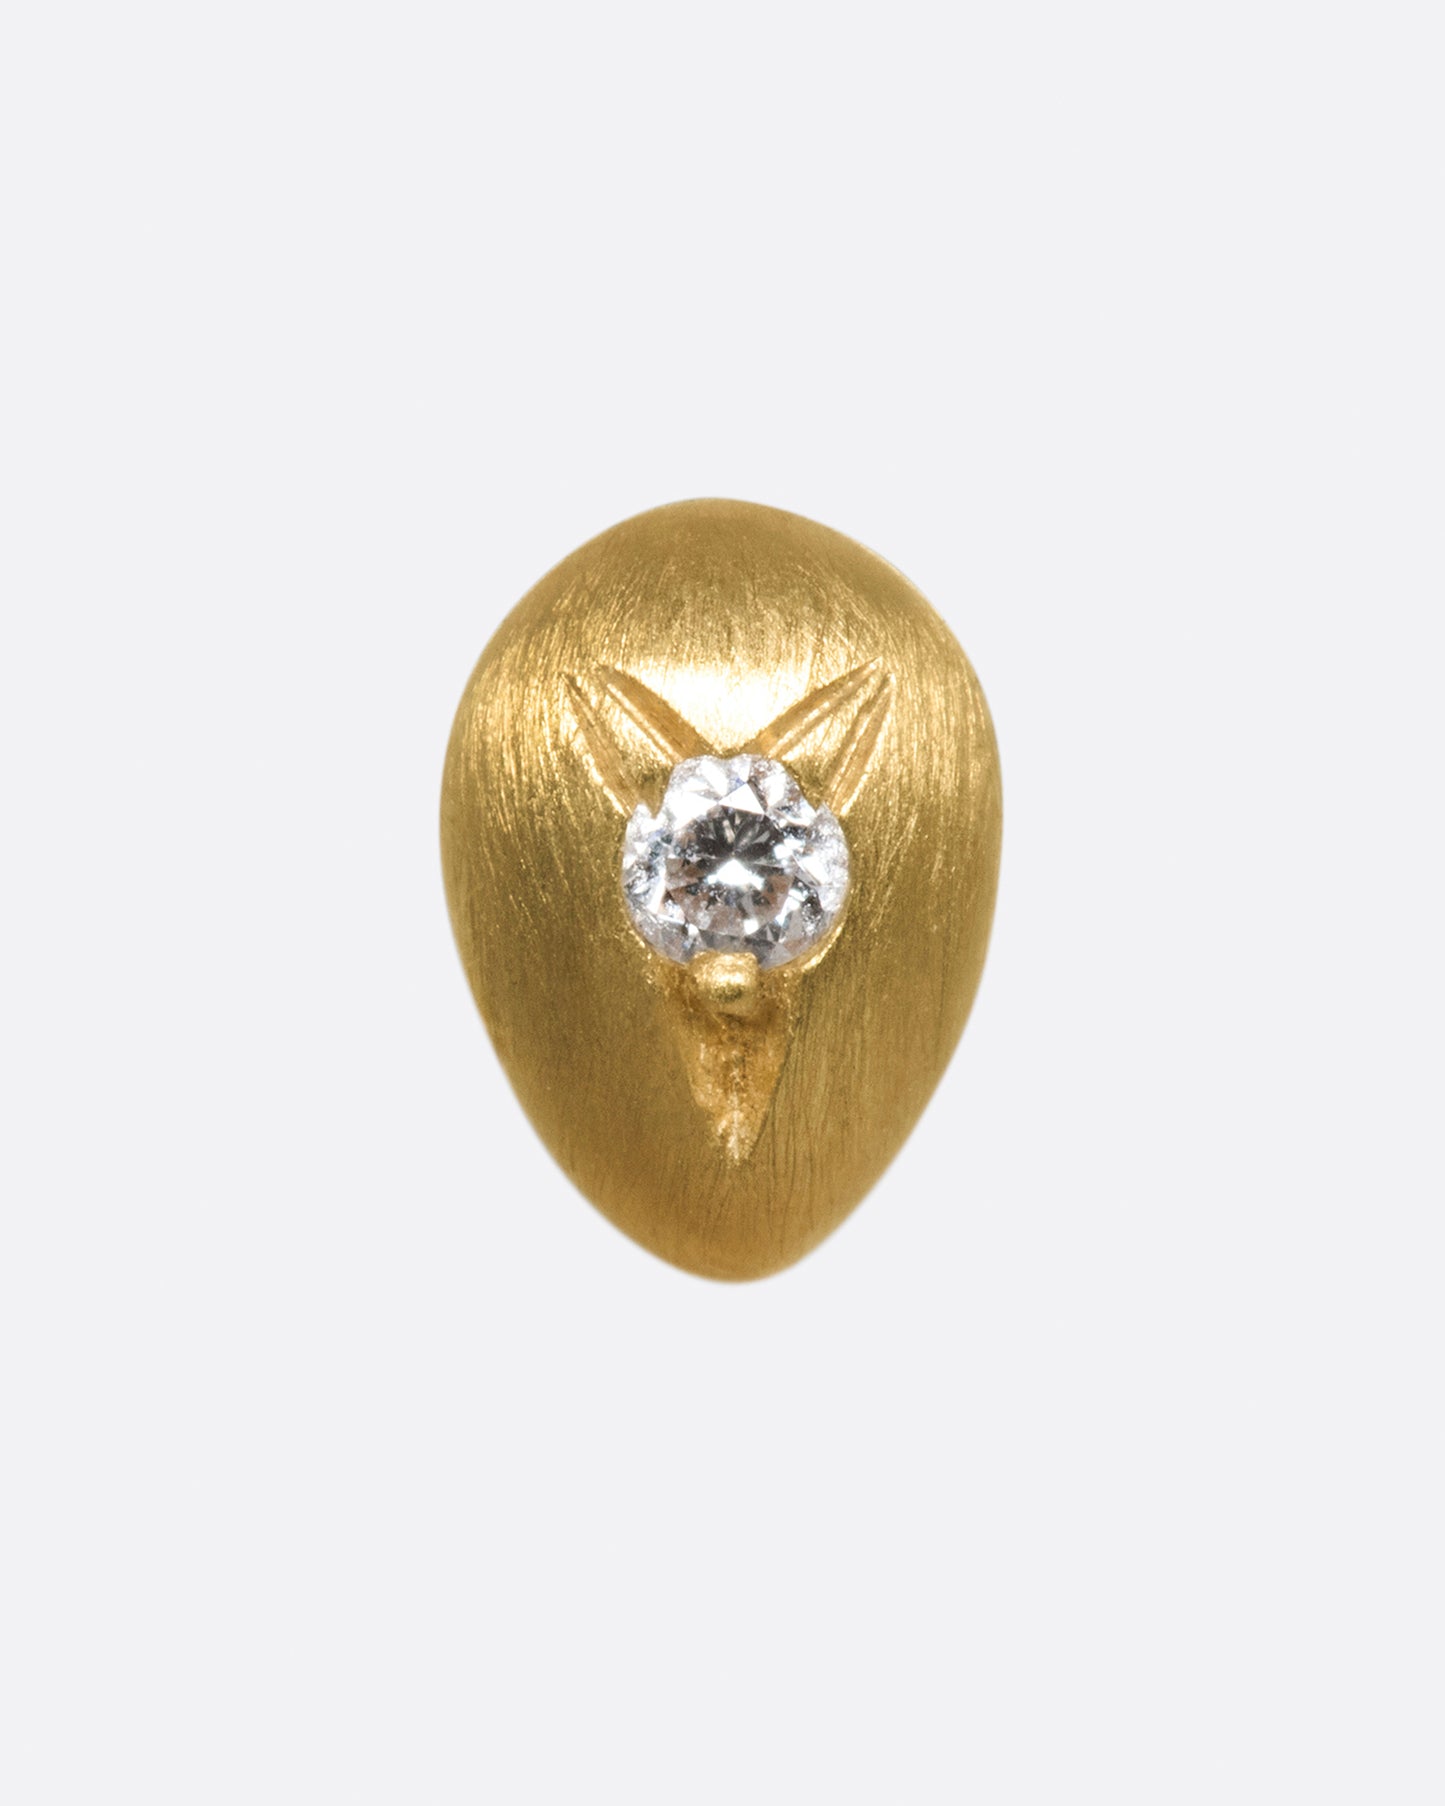 This brushed gold earring is smooth and rounded like a real drop of water.